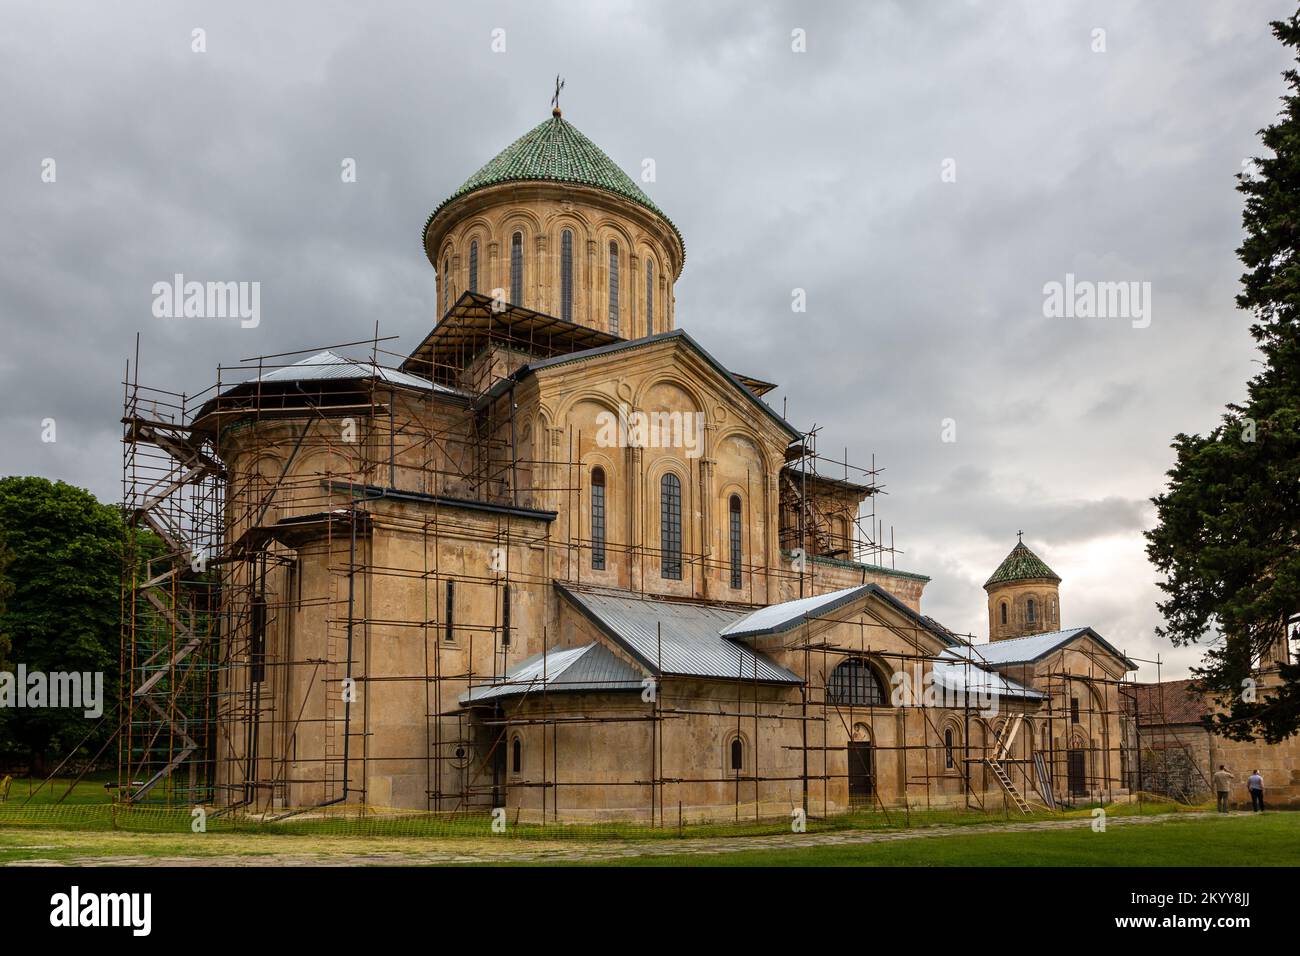 Gelati Monastery, medieval monastic complex near Kutaisi, Georgia founded by King David IV, view with scaffolding during restoration process. Stock Photo